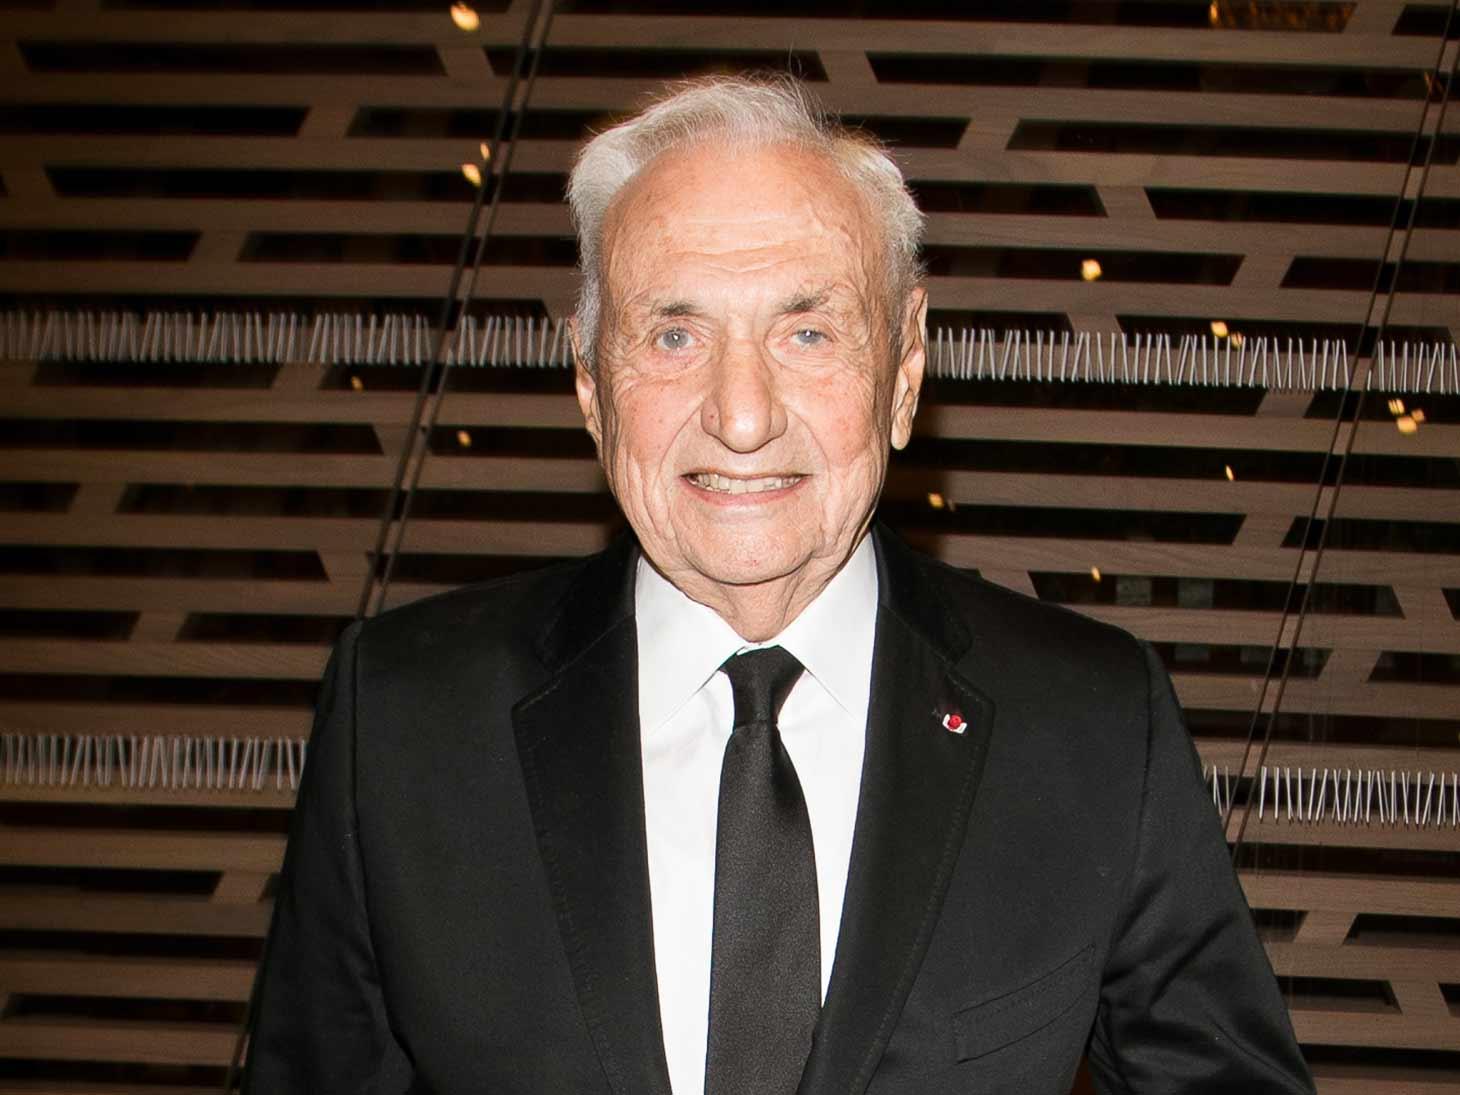 Famed Architect Frank Gehry Granted Restraining Order After Receiving Death Threats